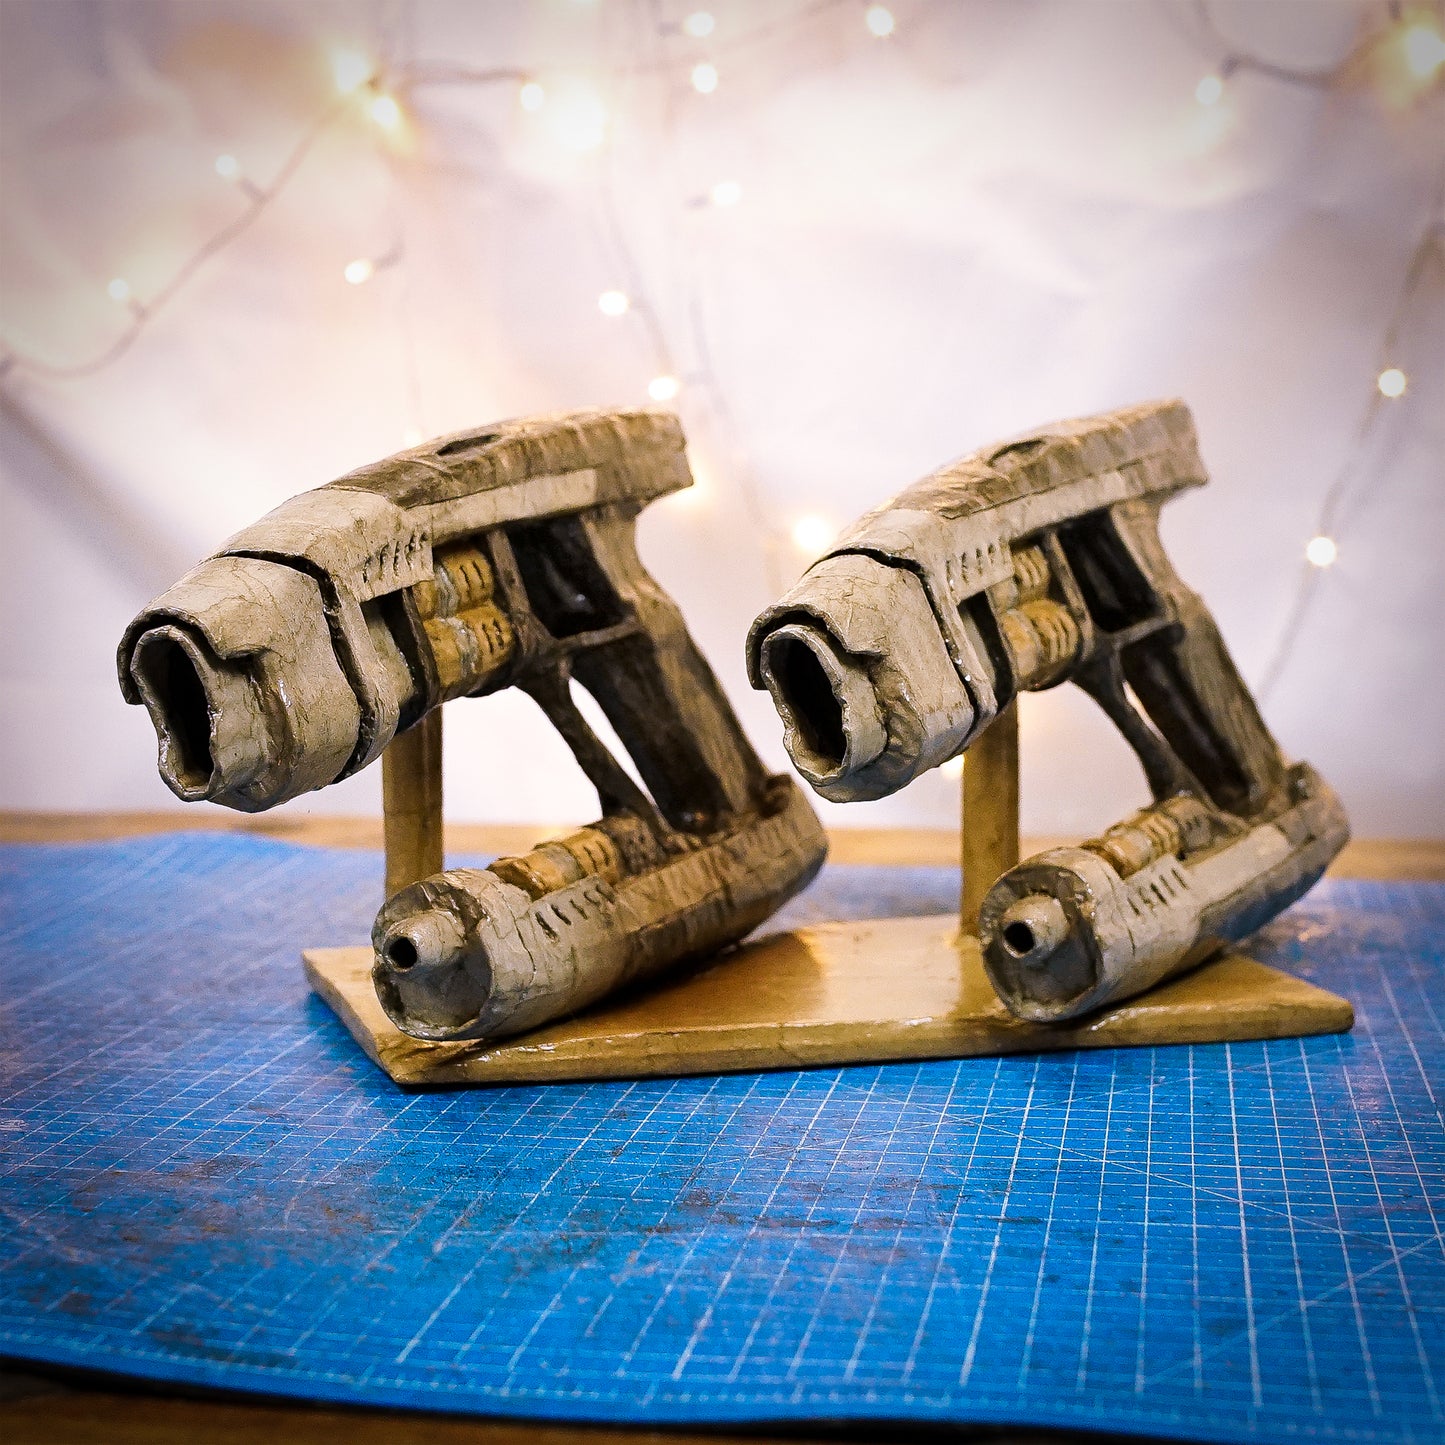 Star-Lord’s blasters TEMPLATES for cardboard DIY